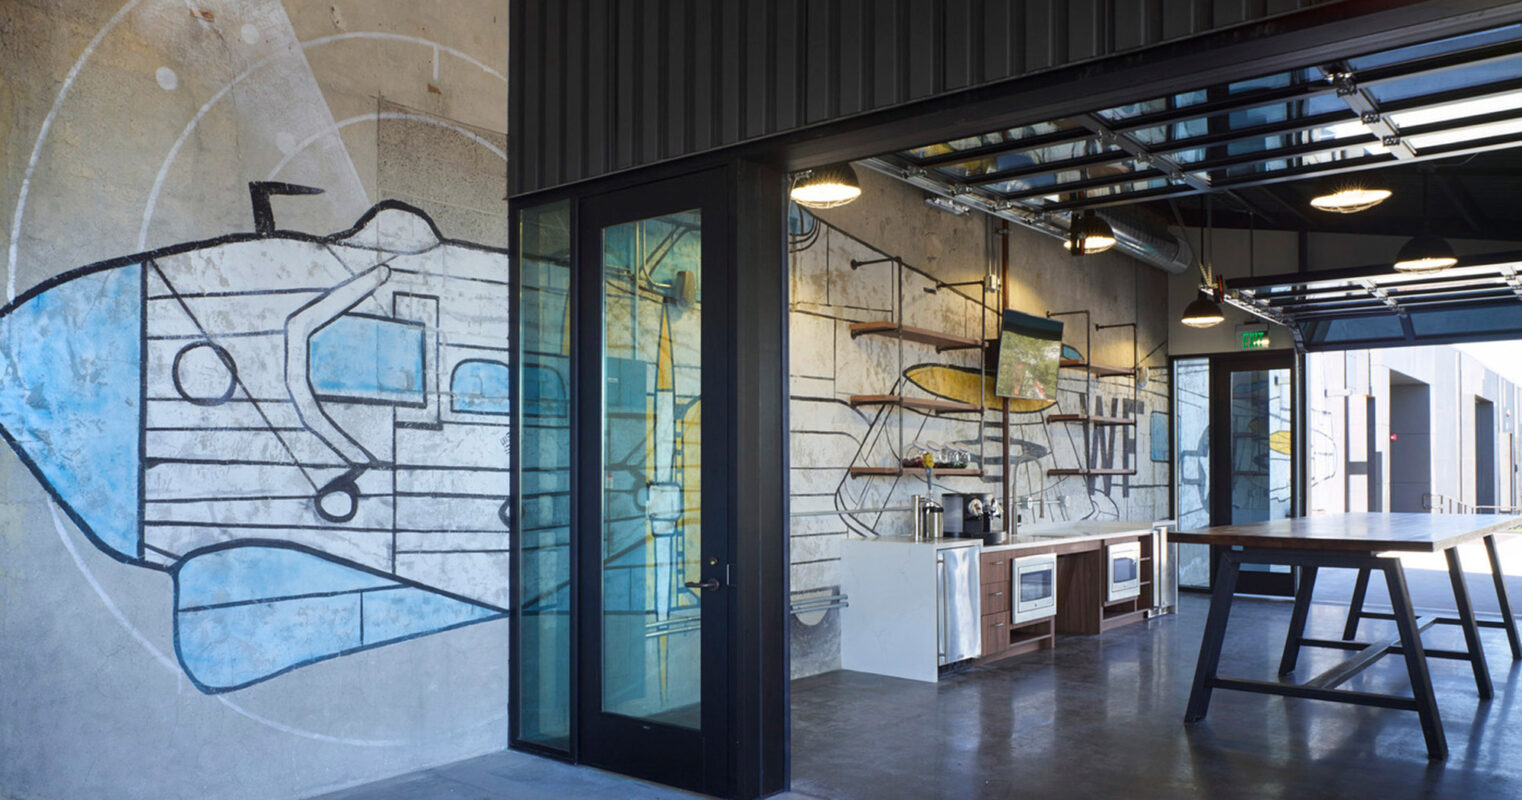 Contemporary industrial-style office space featuring exposed ductwork, polished concrete floors, and a large graffiti mural adding an artistic accent to the textured gray walls. Glass doors, sleek furnishings, and pendant lighting complete the modern aesthetic.